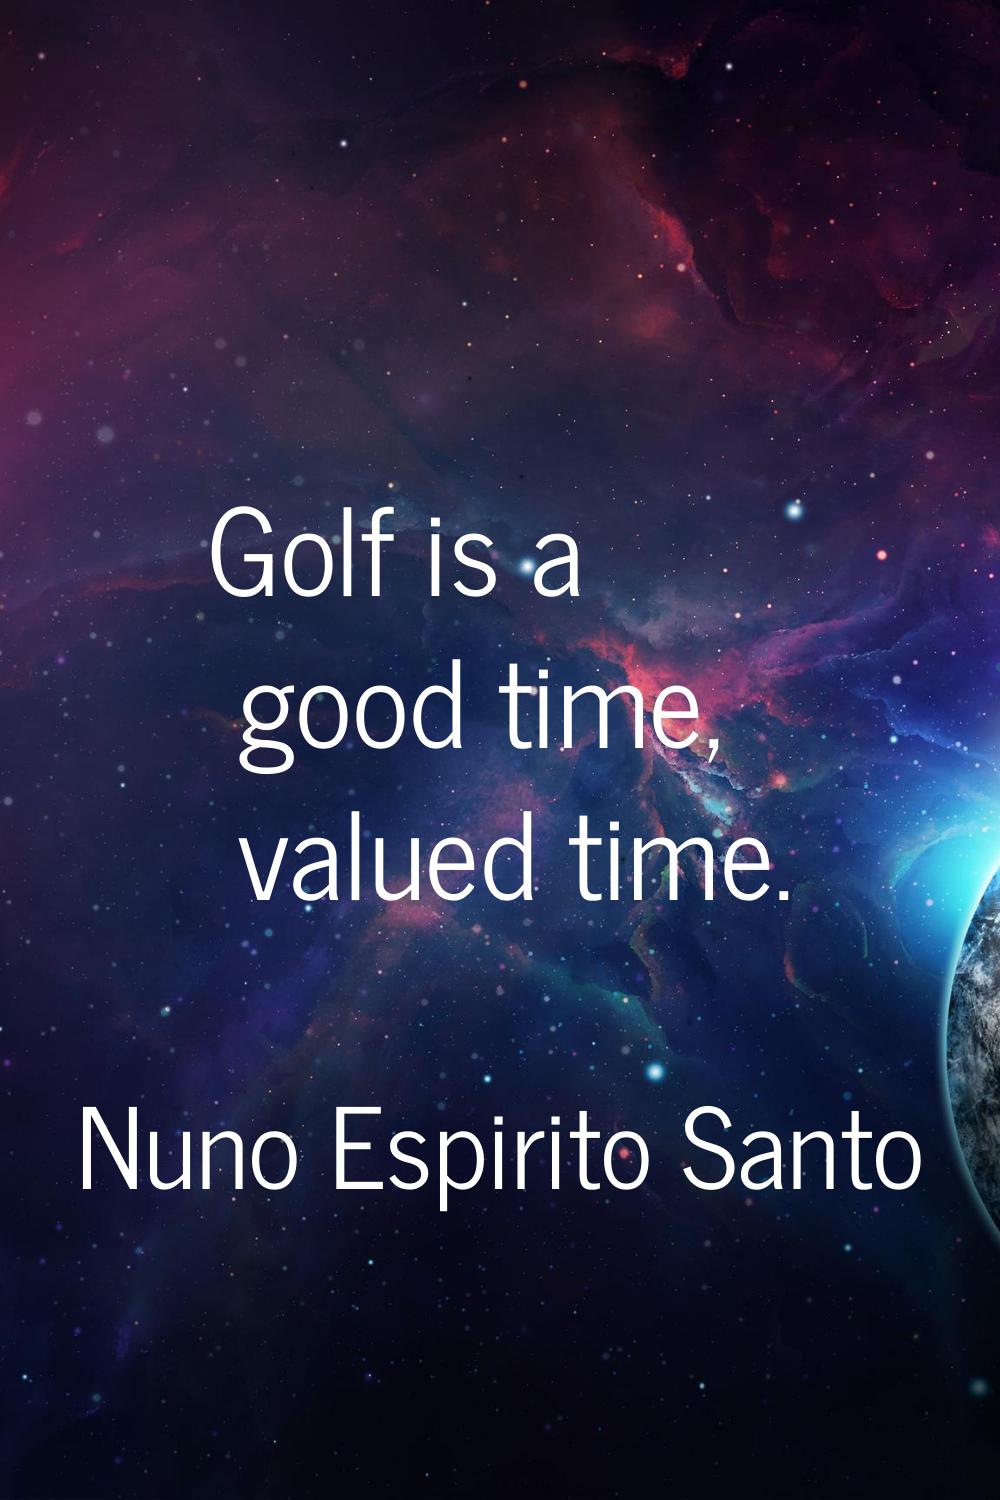 Golf is a good time, valued time.